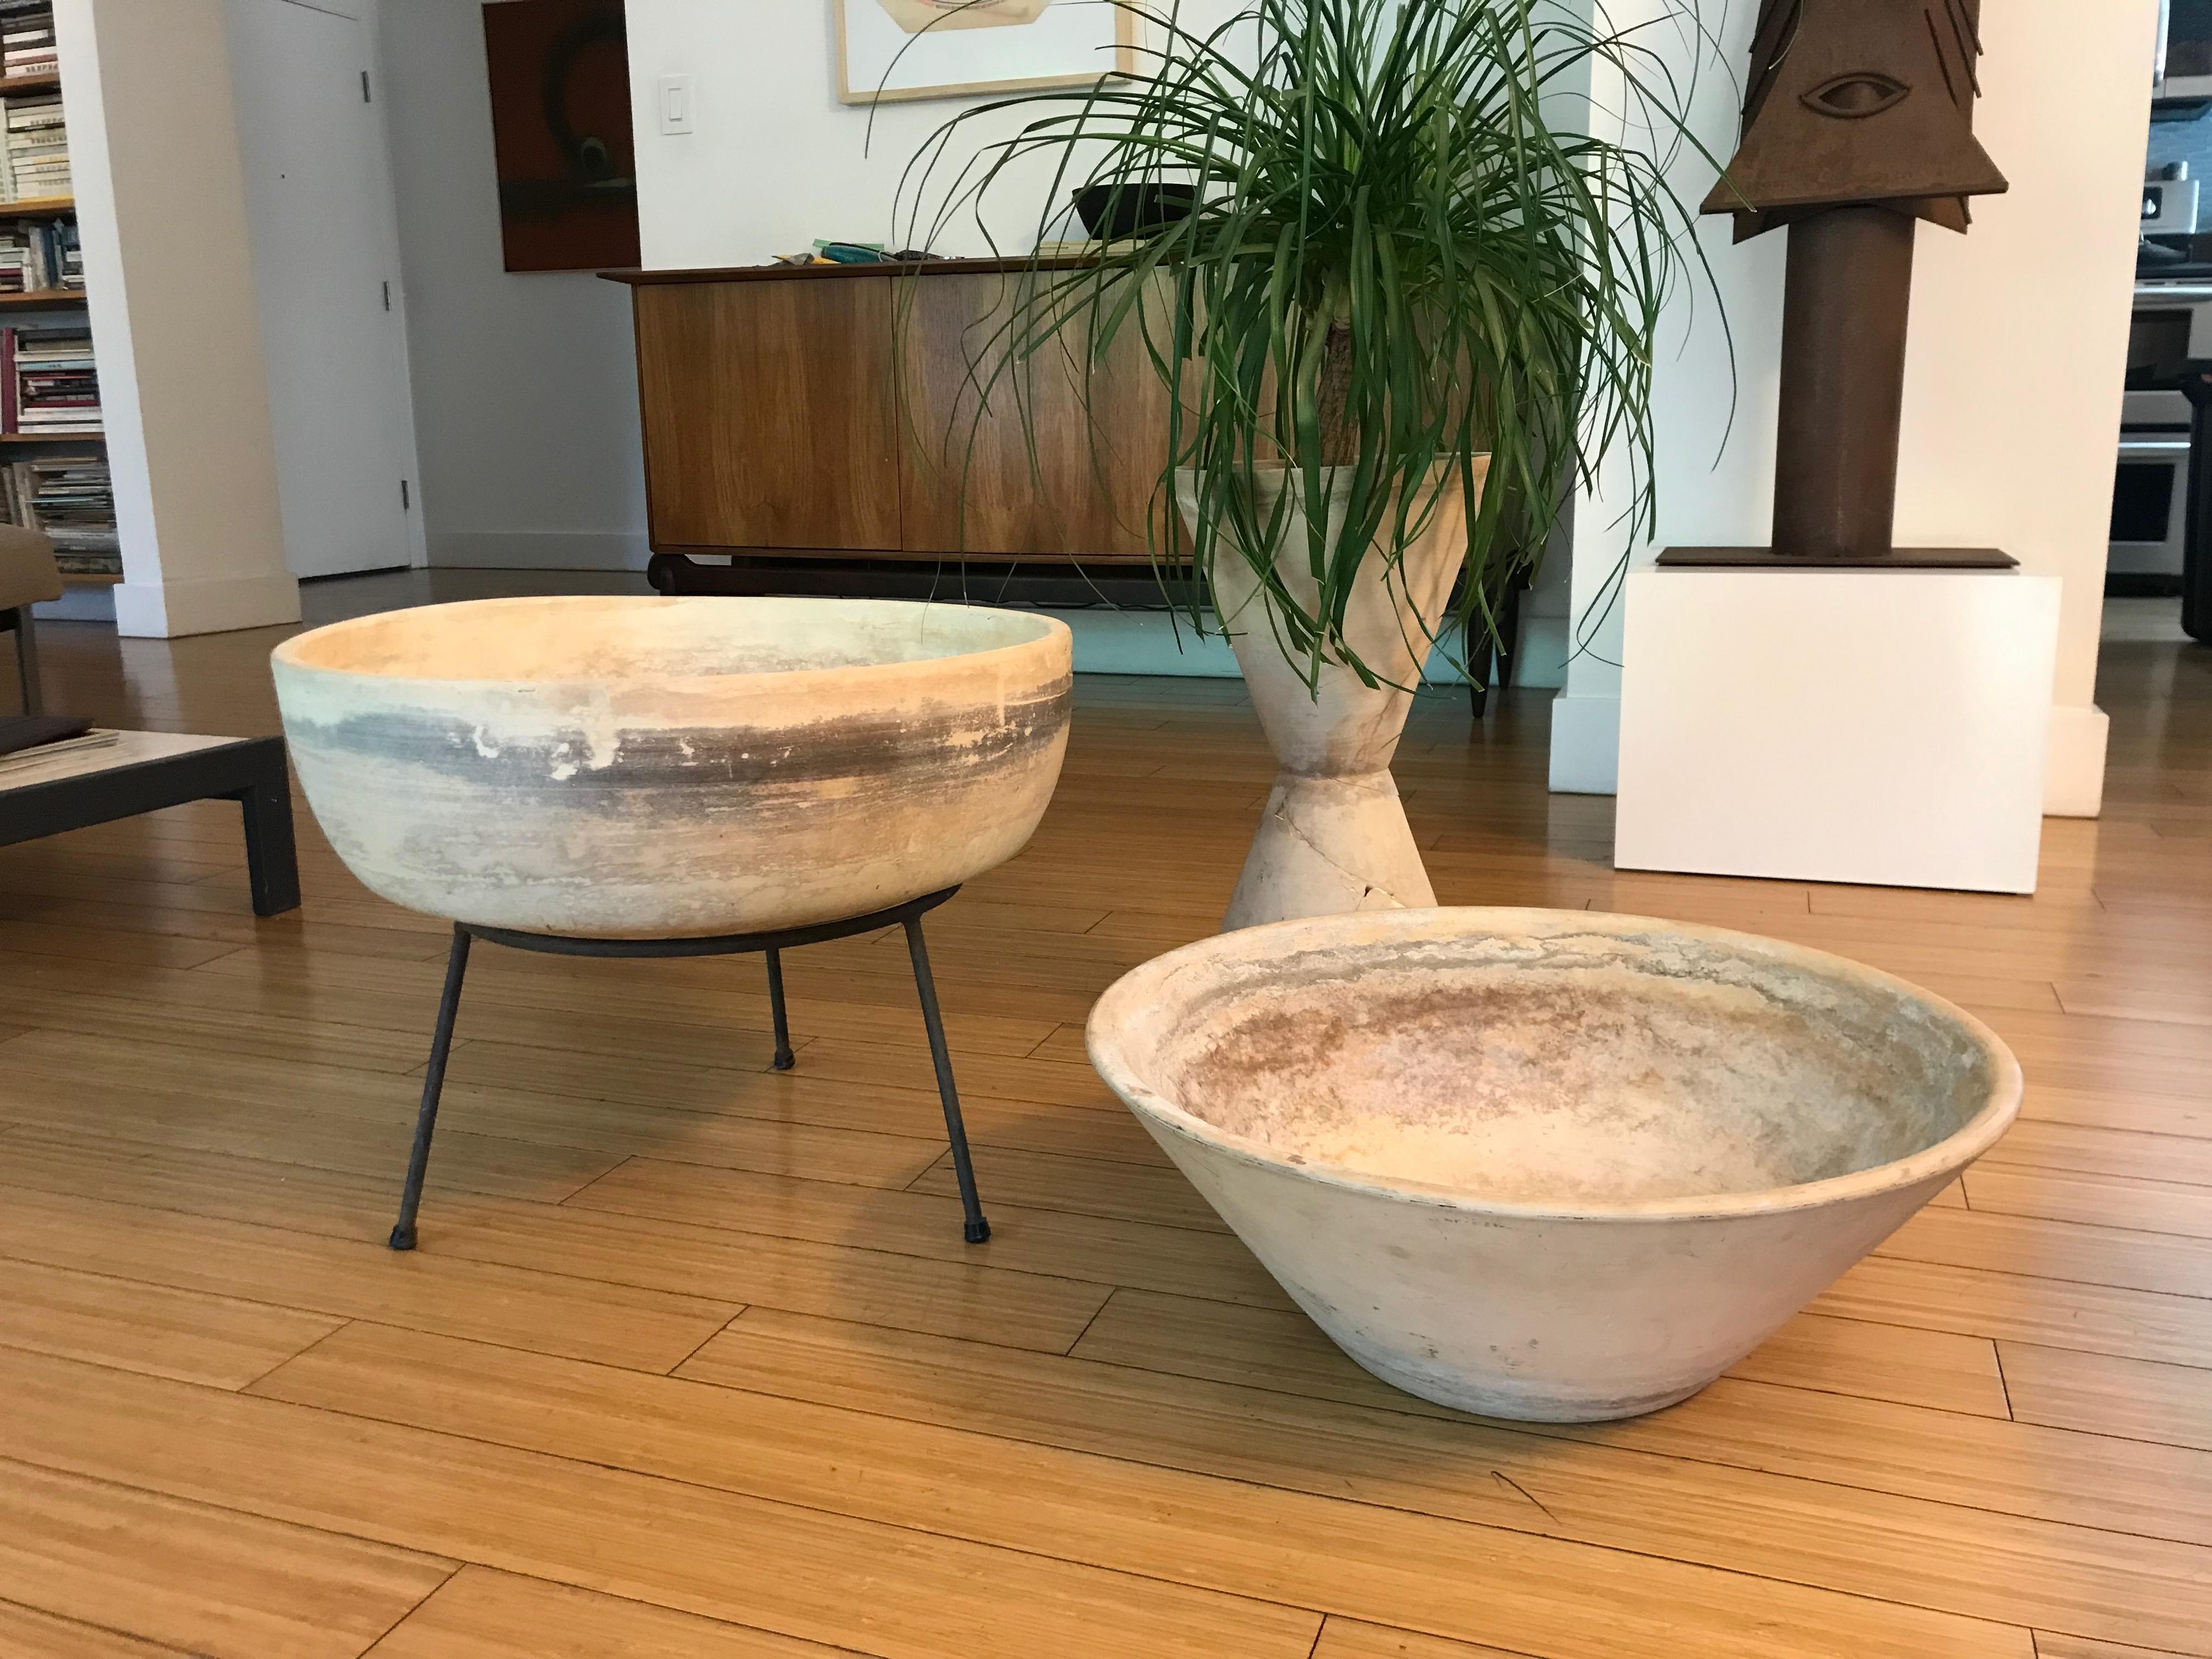 Classic California modern design.
Original wear with a wonderful patina.
No chips or cracks.
The bowl has a slight (happy accident) indent / pressed inward side that occurred at the factory.
The bowl is a a John Follis design with one water drain